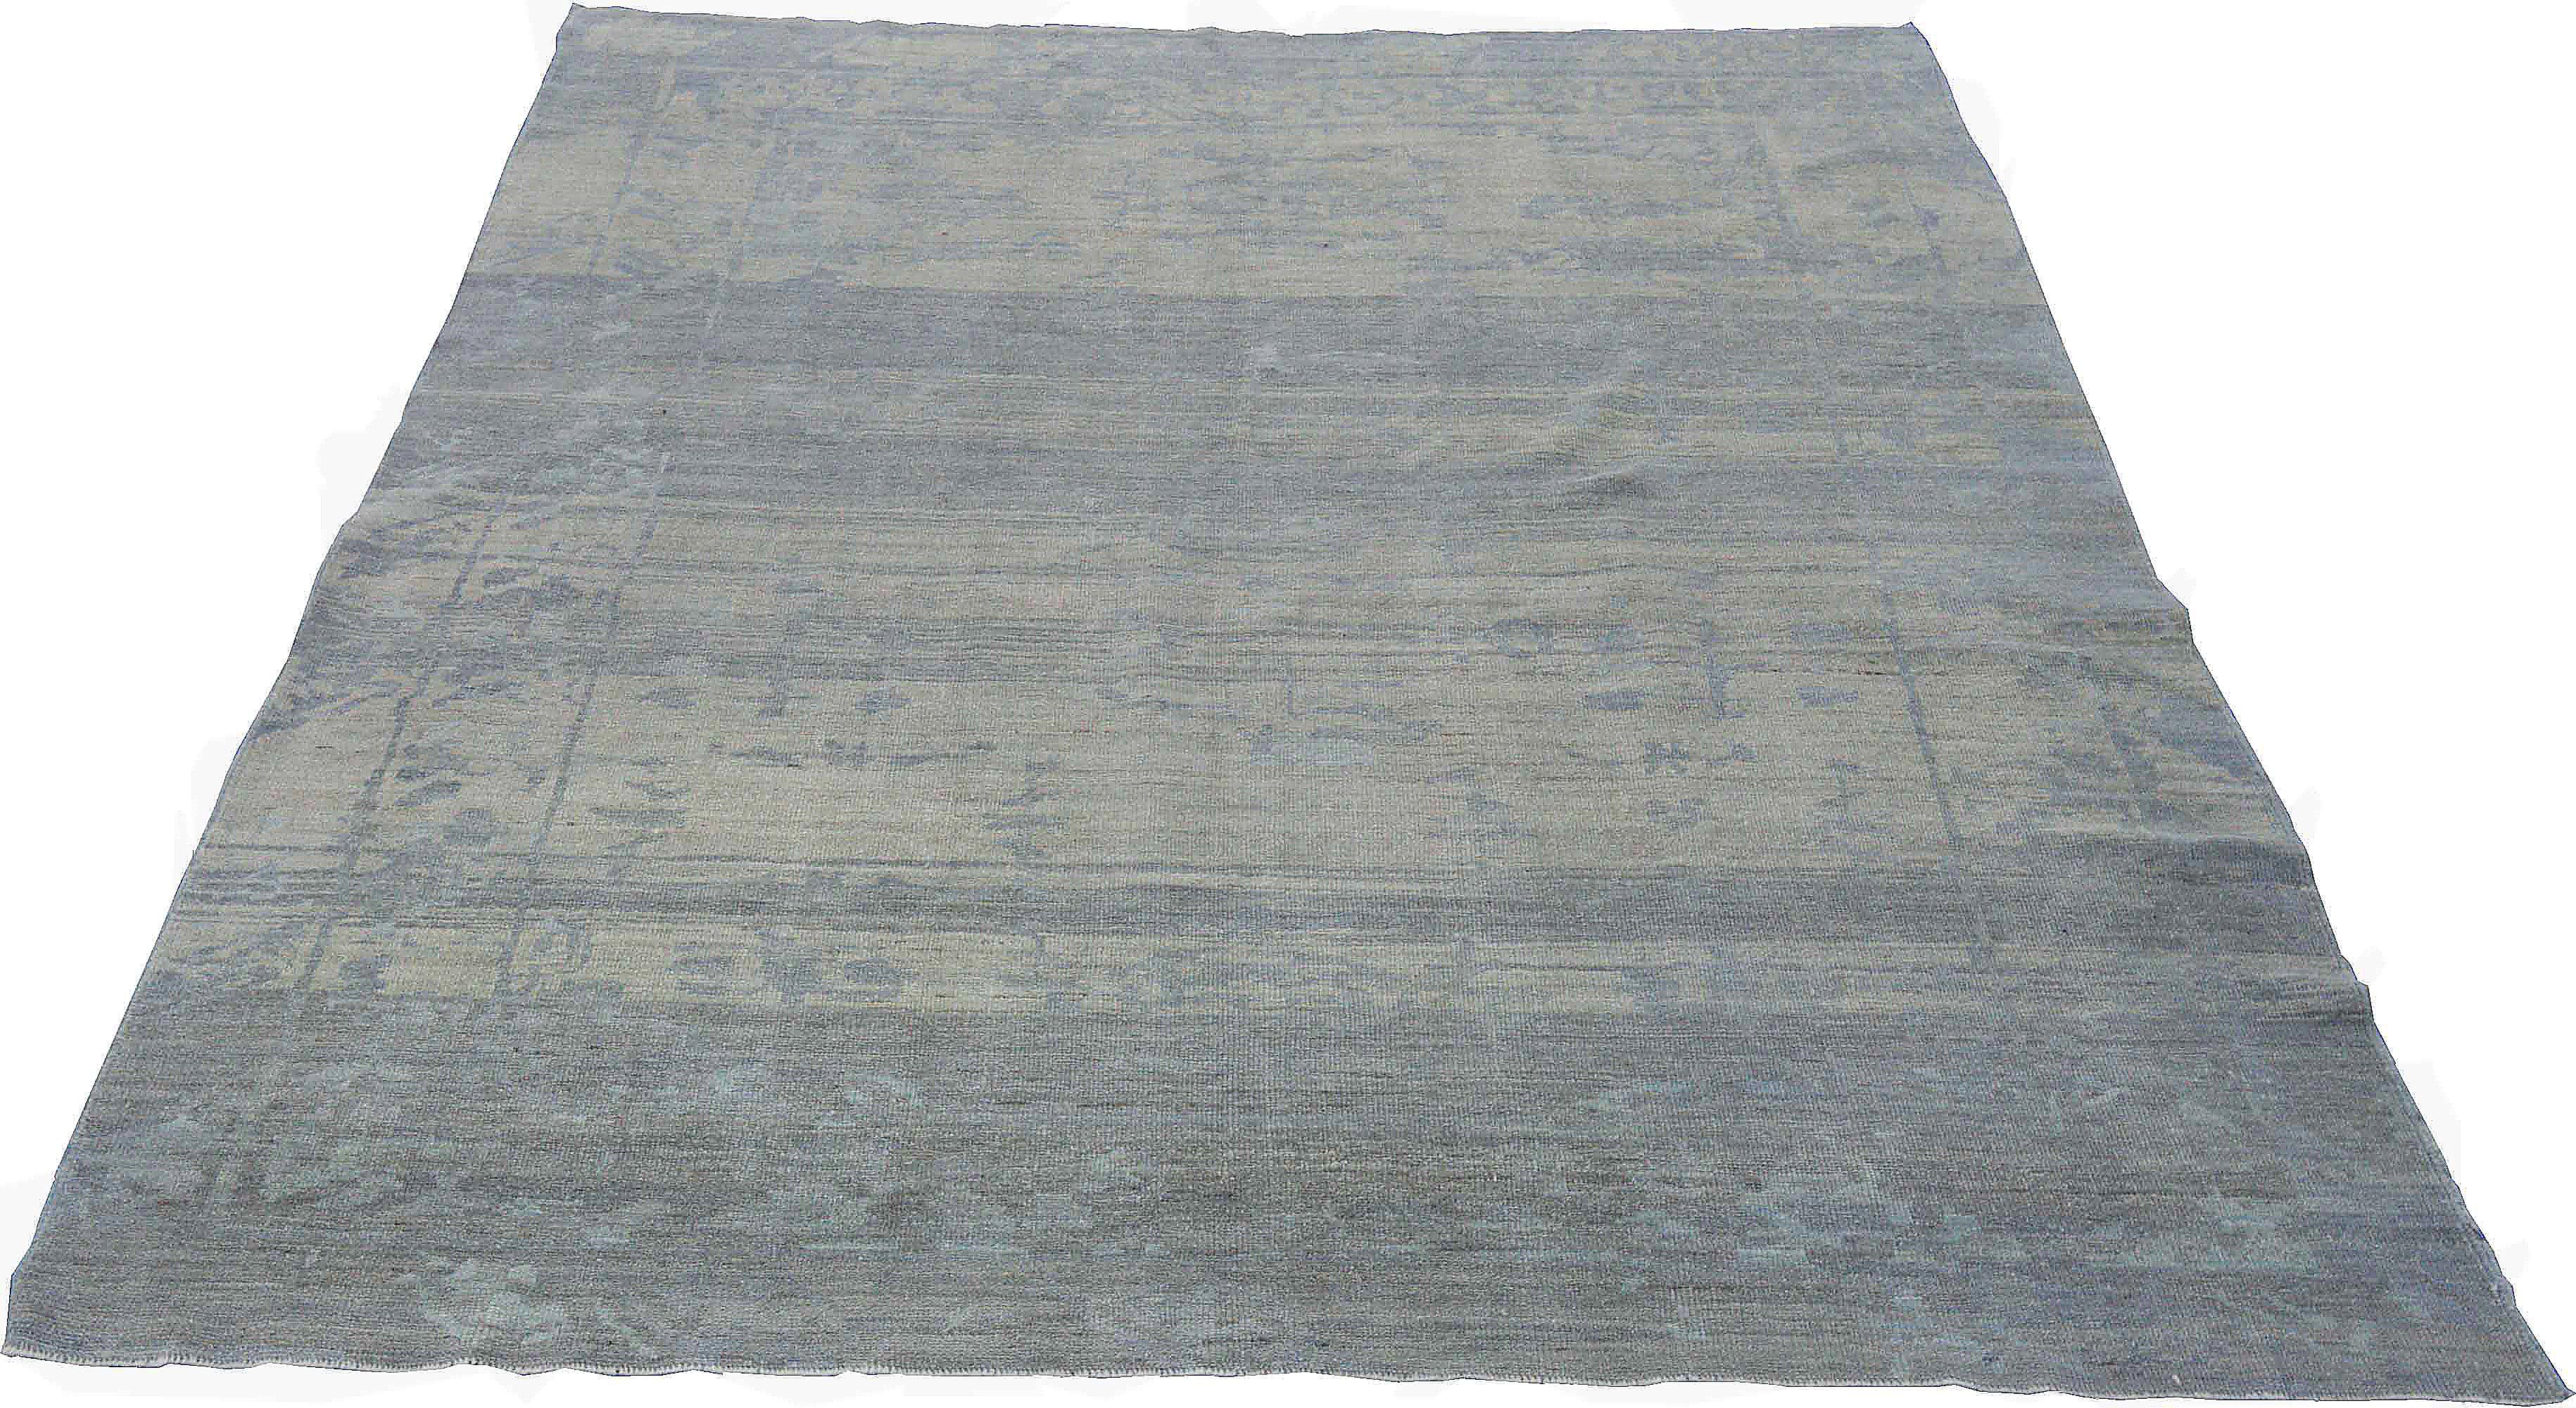 Hand-Woven Contemporary Oushak Rug with Floral Motifs in Gray and Blue on Beige Field For Sale